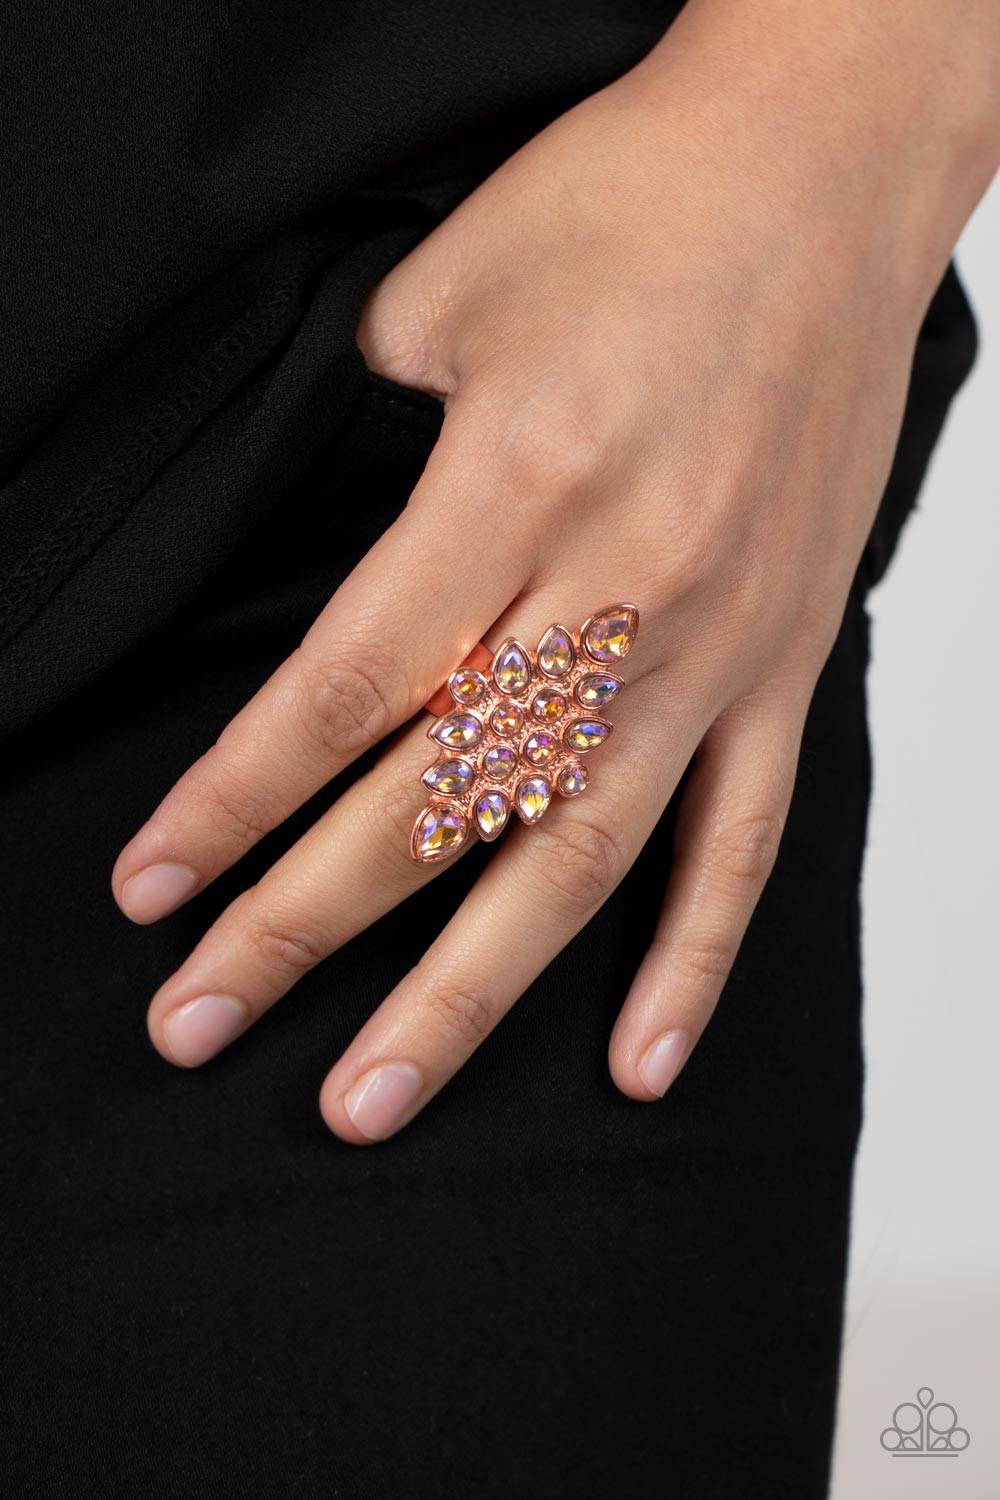 Combustible Iridescence - Copper Ring - Paparazzi Accessories